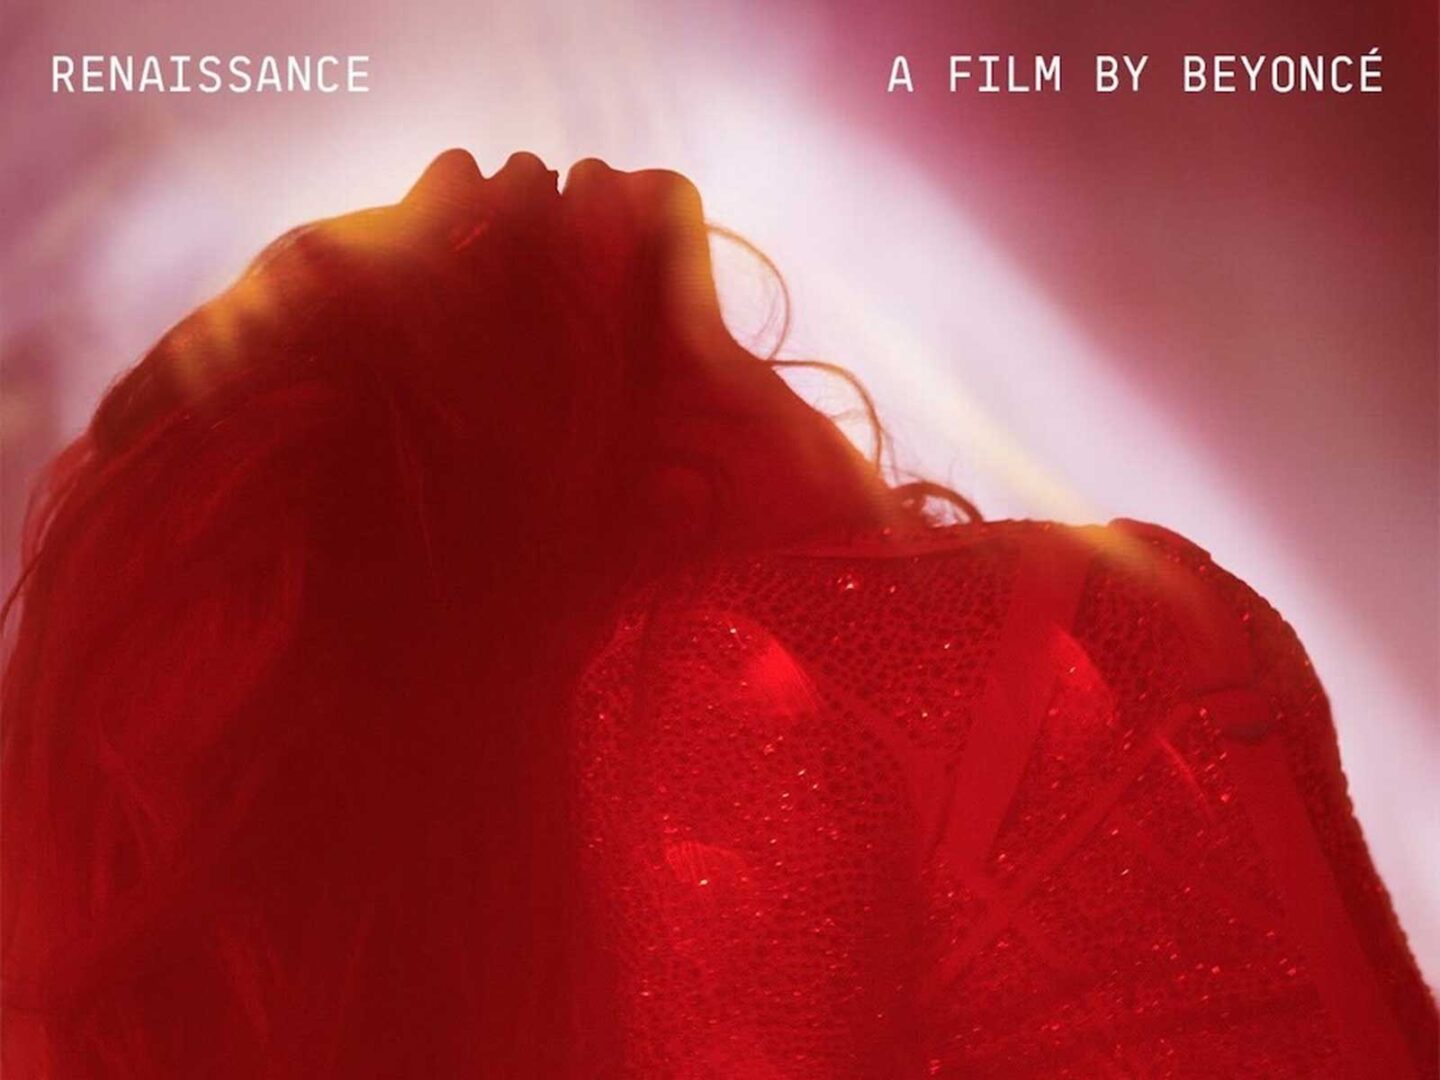 Here is the trailer for: Renaissance: a film by Beyoncé’.